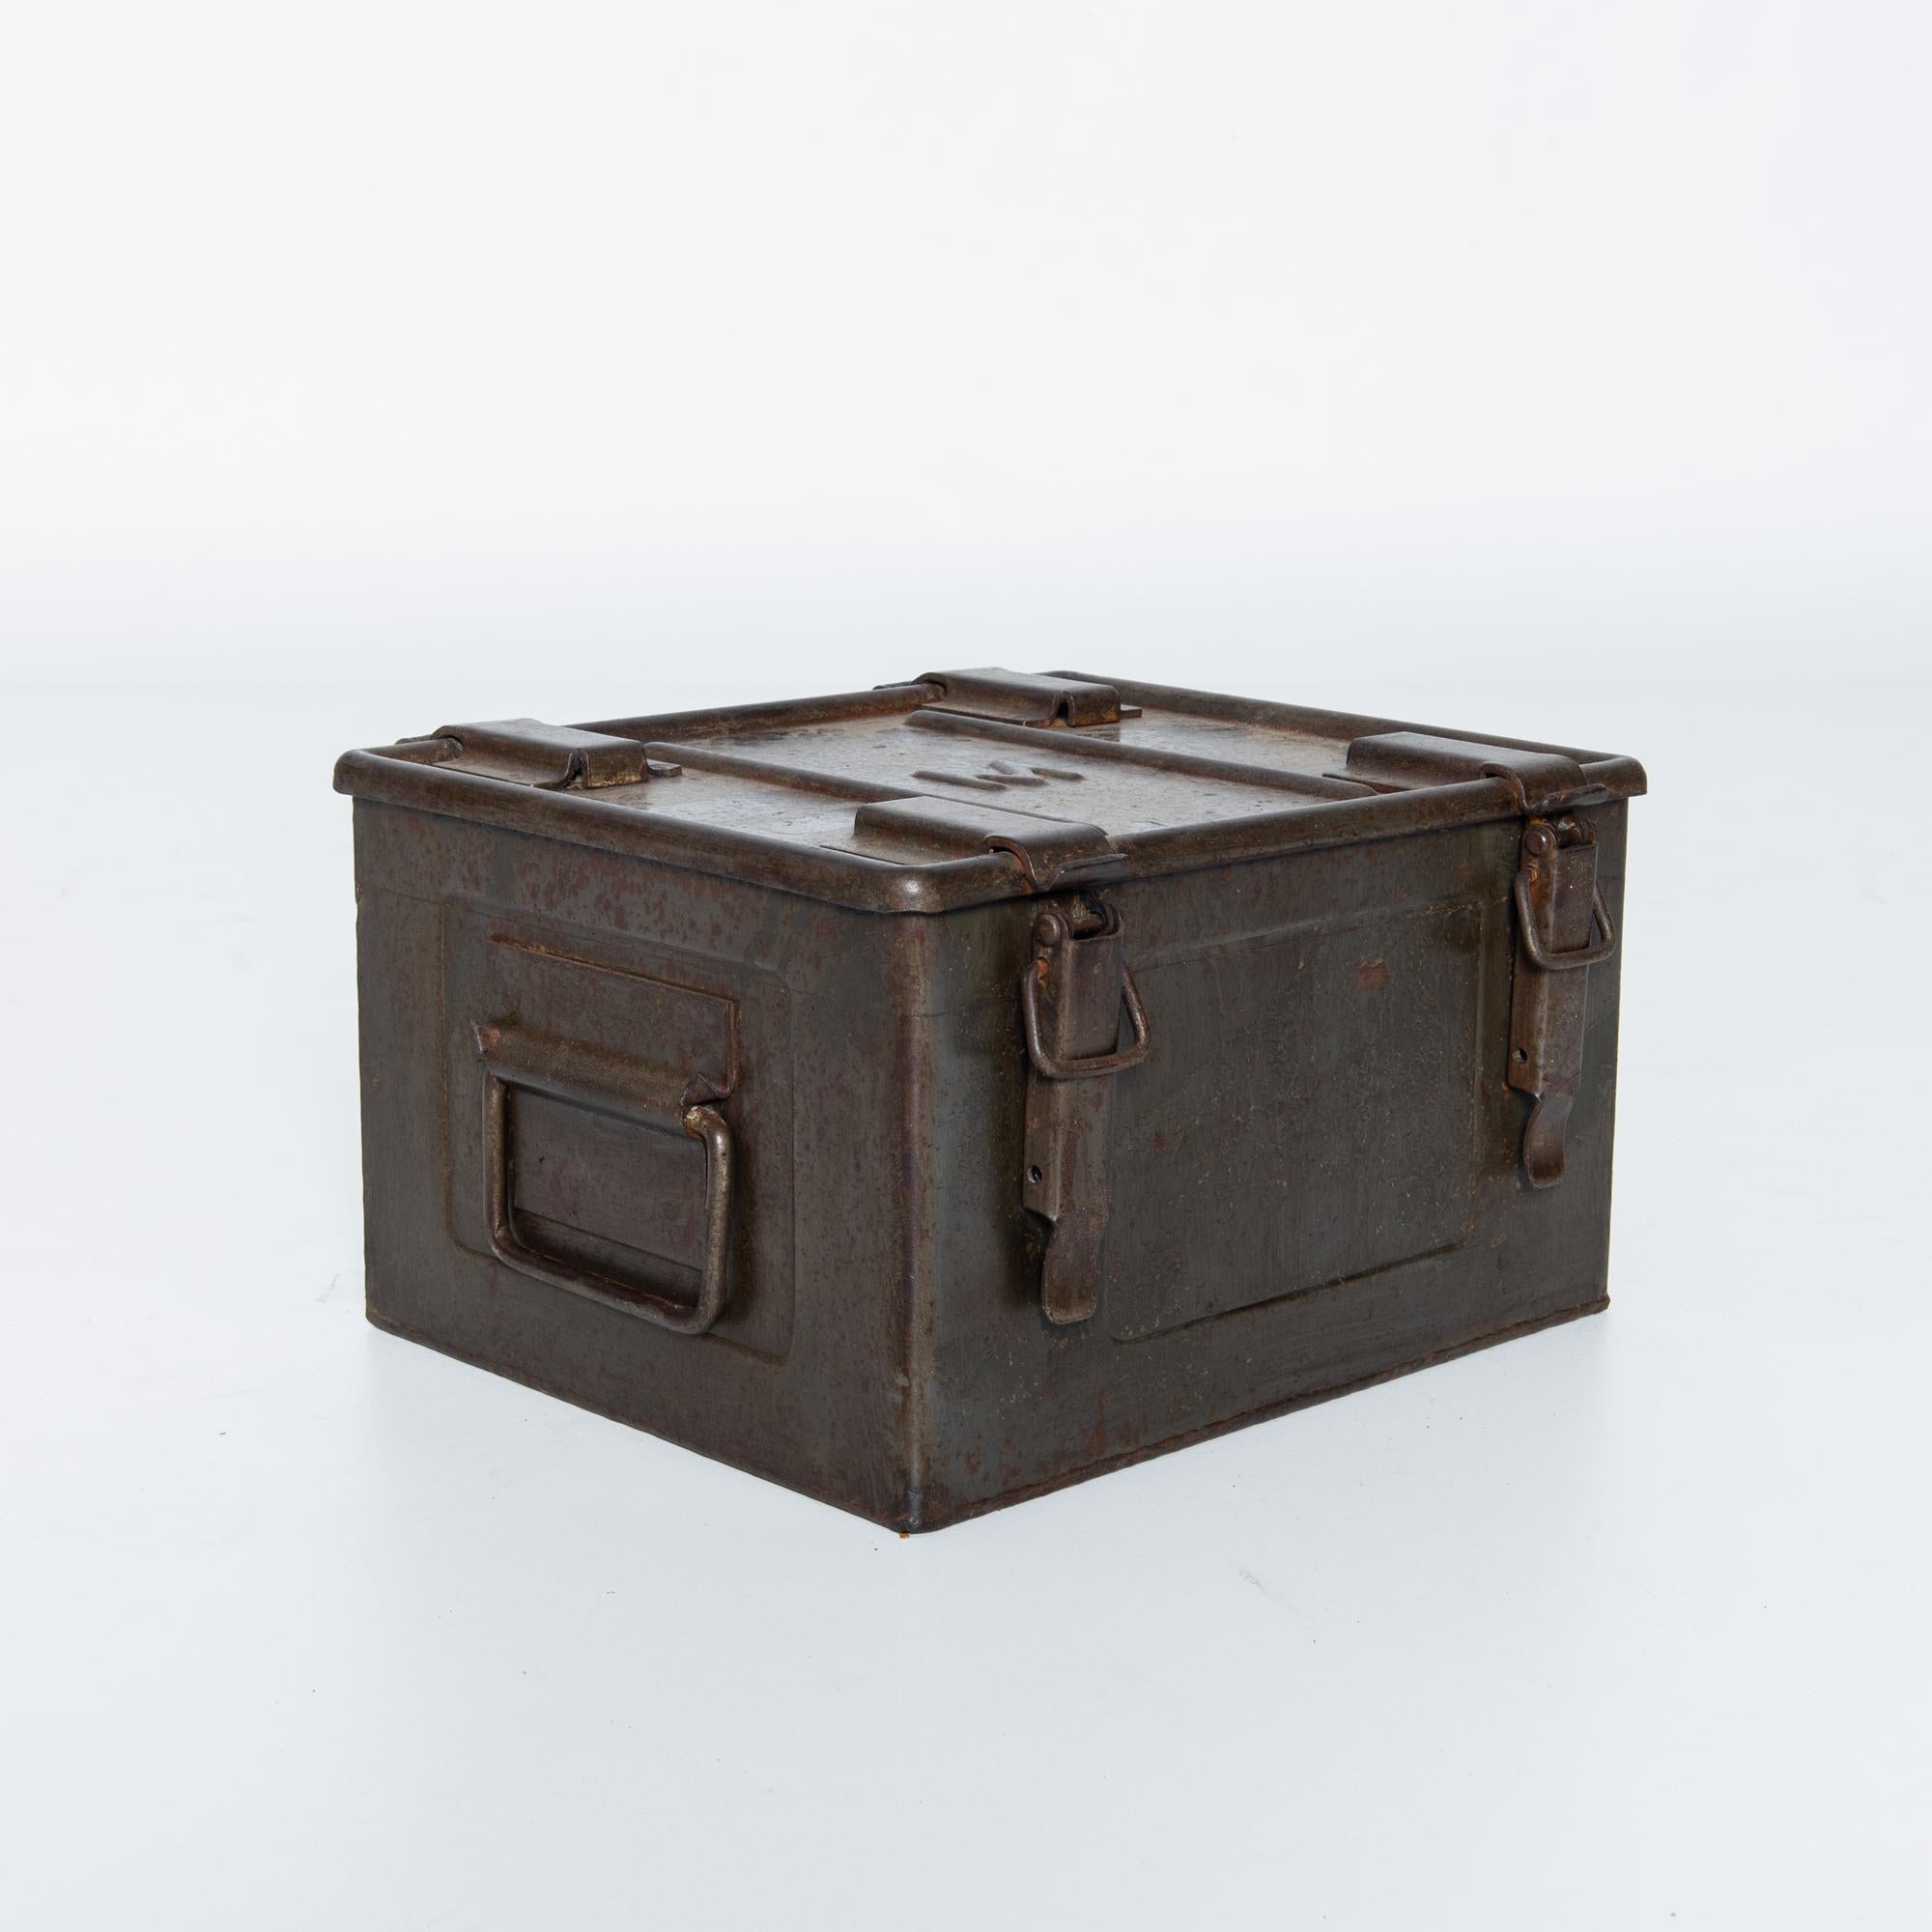 This 1920s Belgian Metal Box is a true relic of the past, offering a glimpse into the history of everyday objects. Its sturdy construction speaks of a time when durability was paramount, and its weathered surface tells a story of decades gone by.